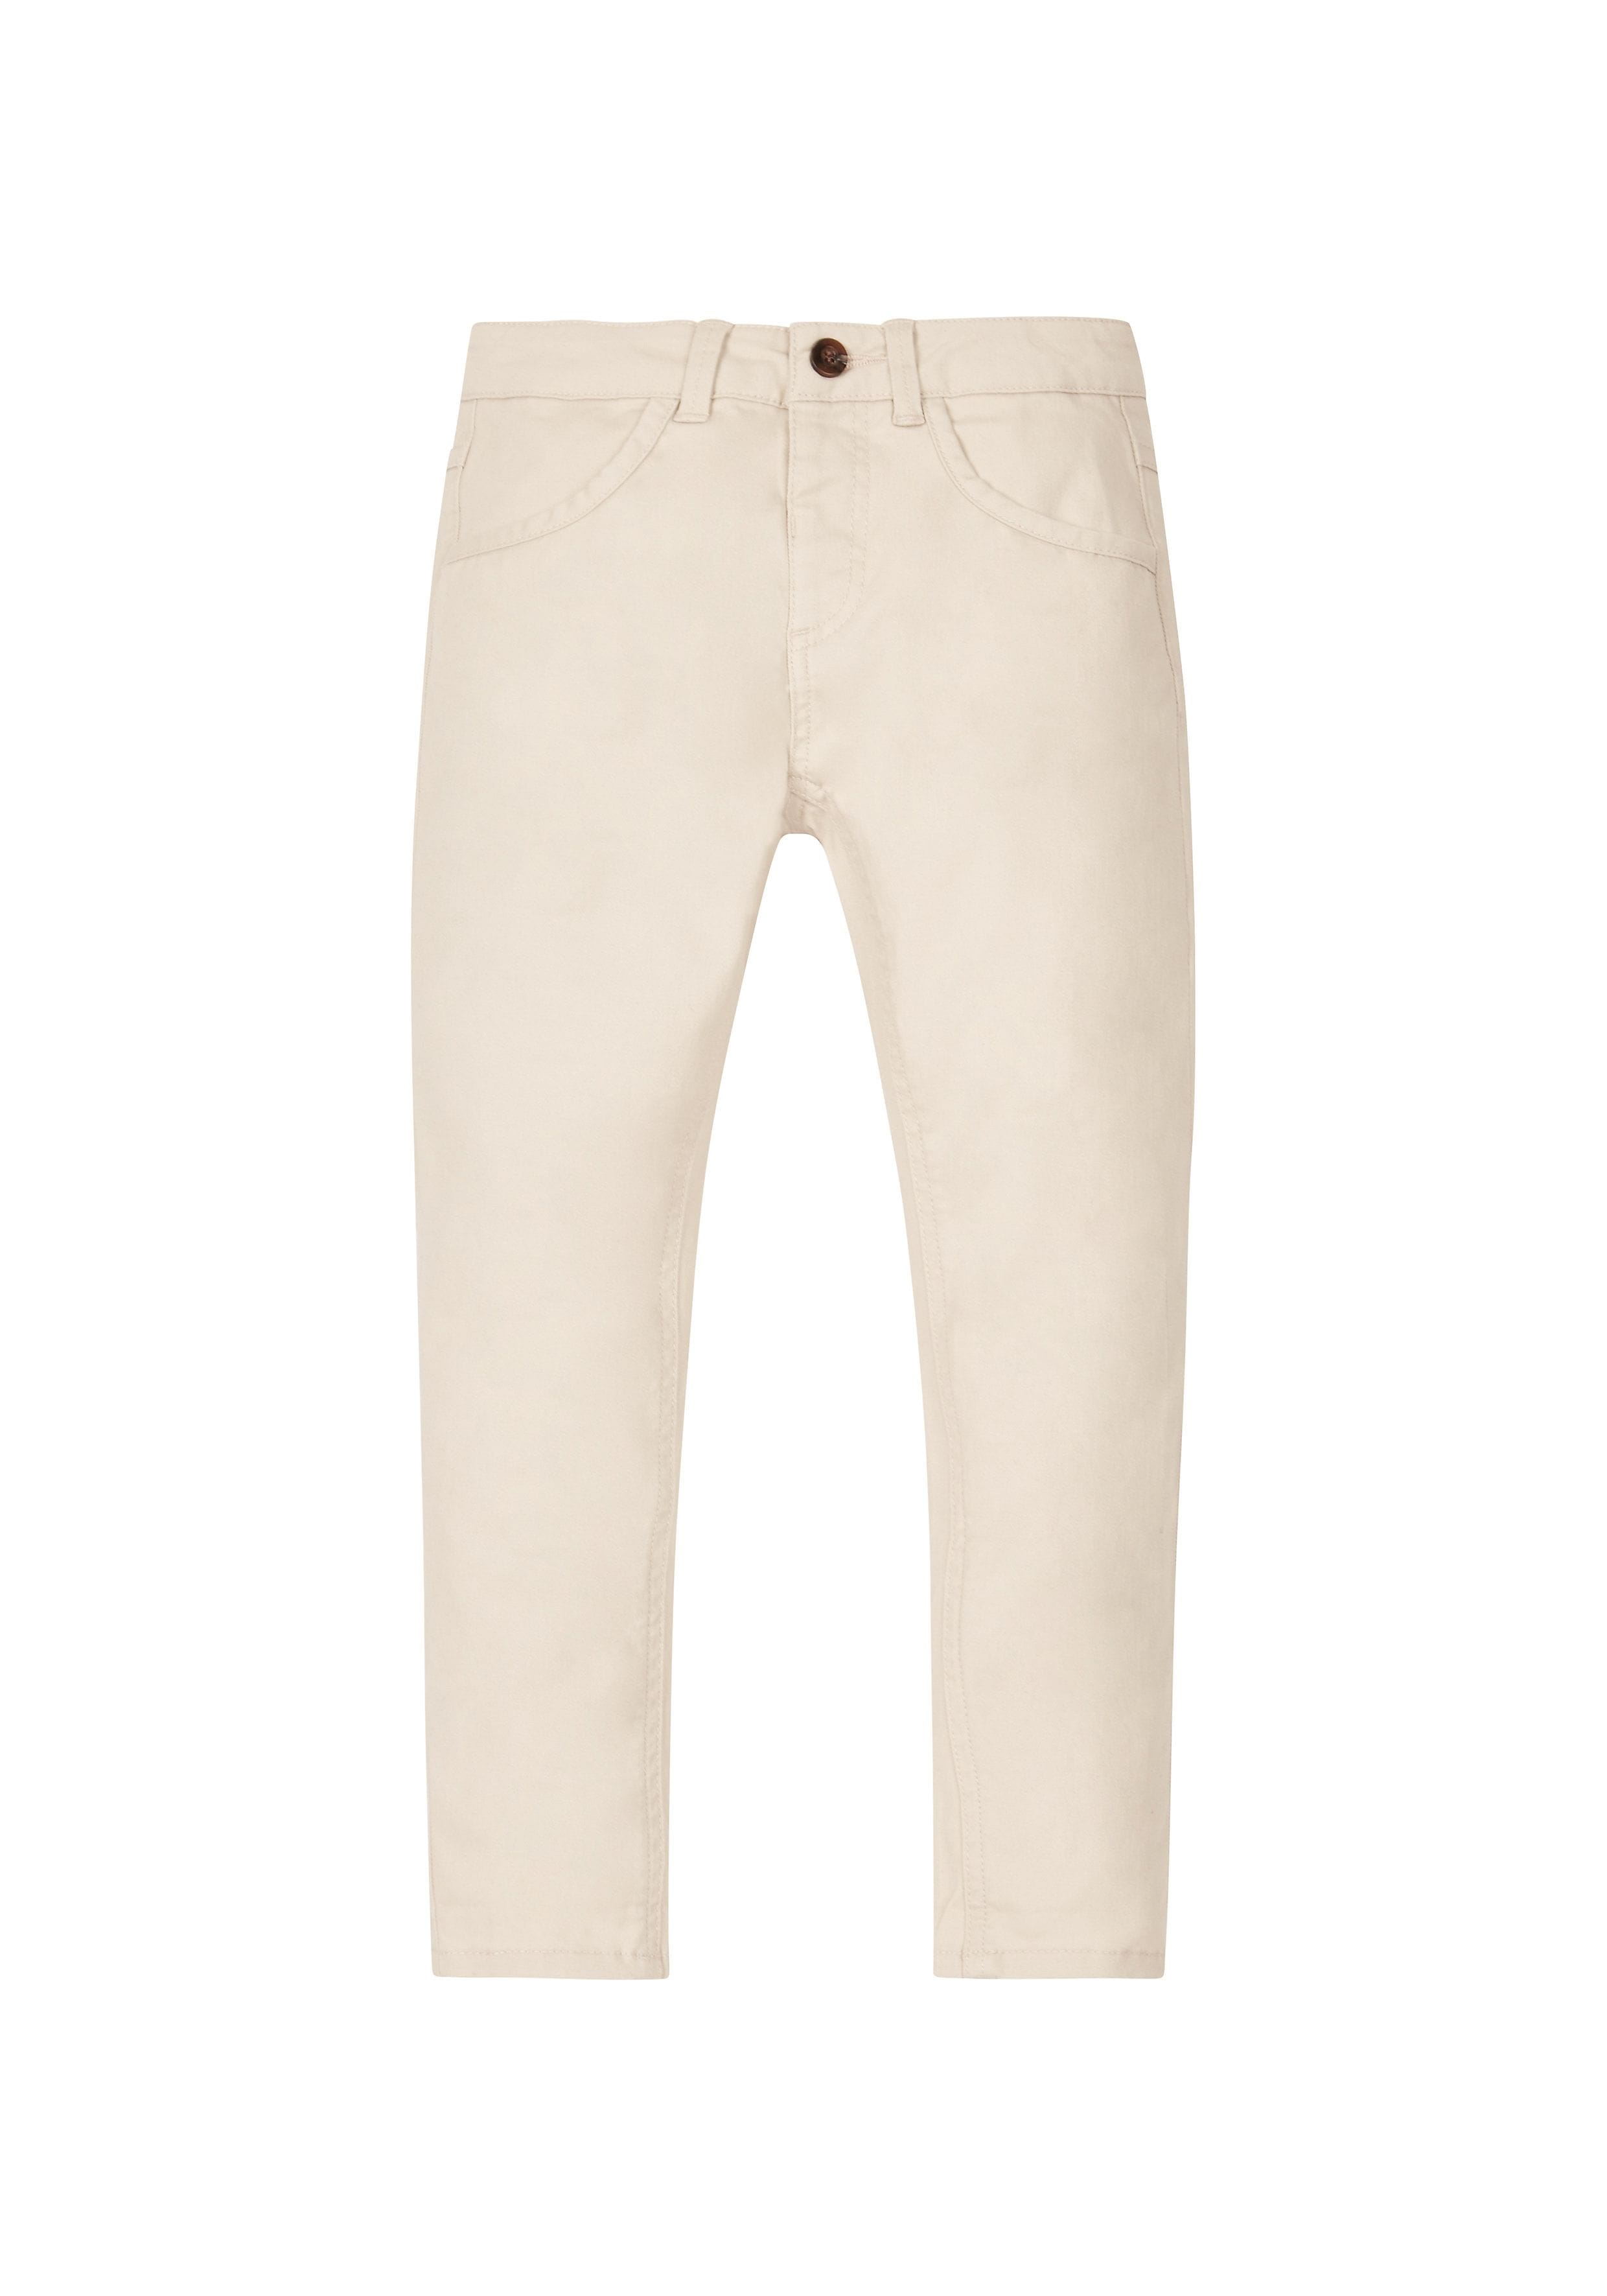 Mothercare | Boys Twill Trousers - Beige 0